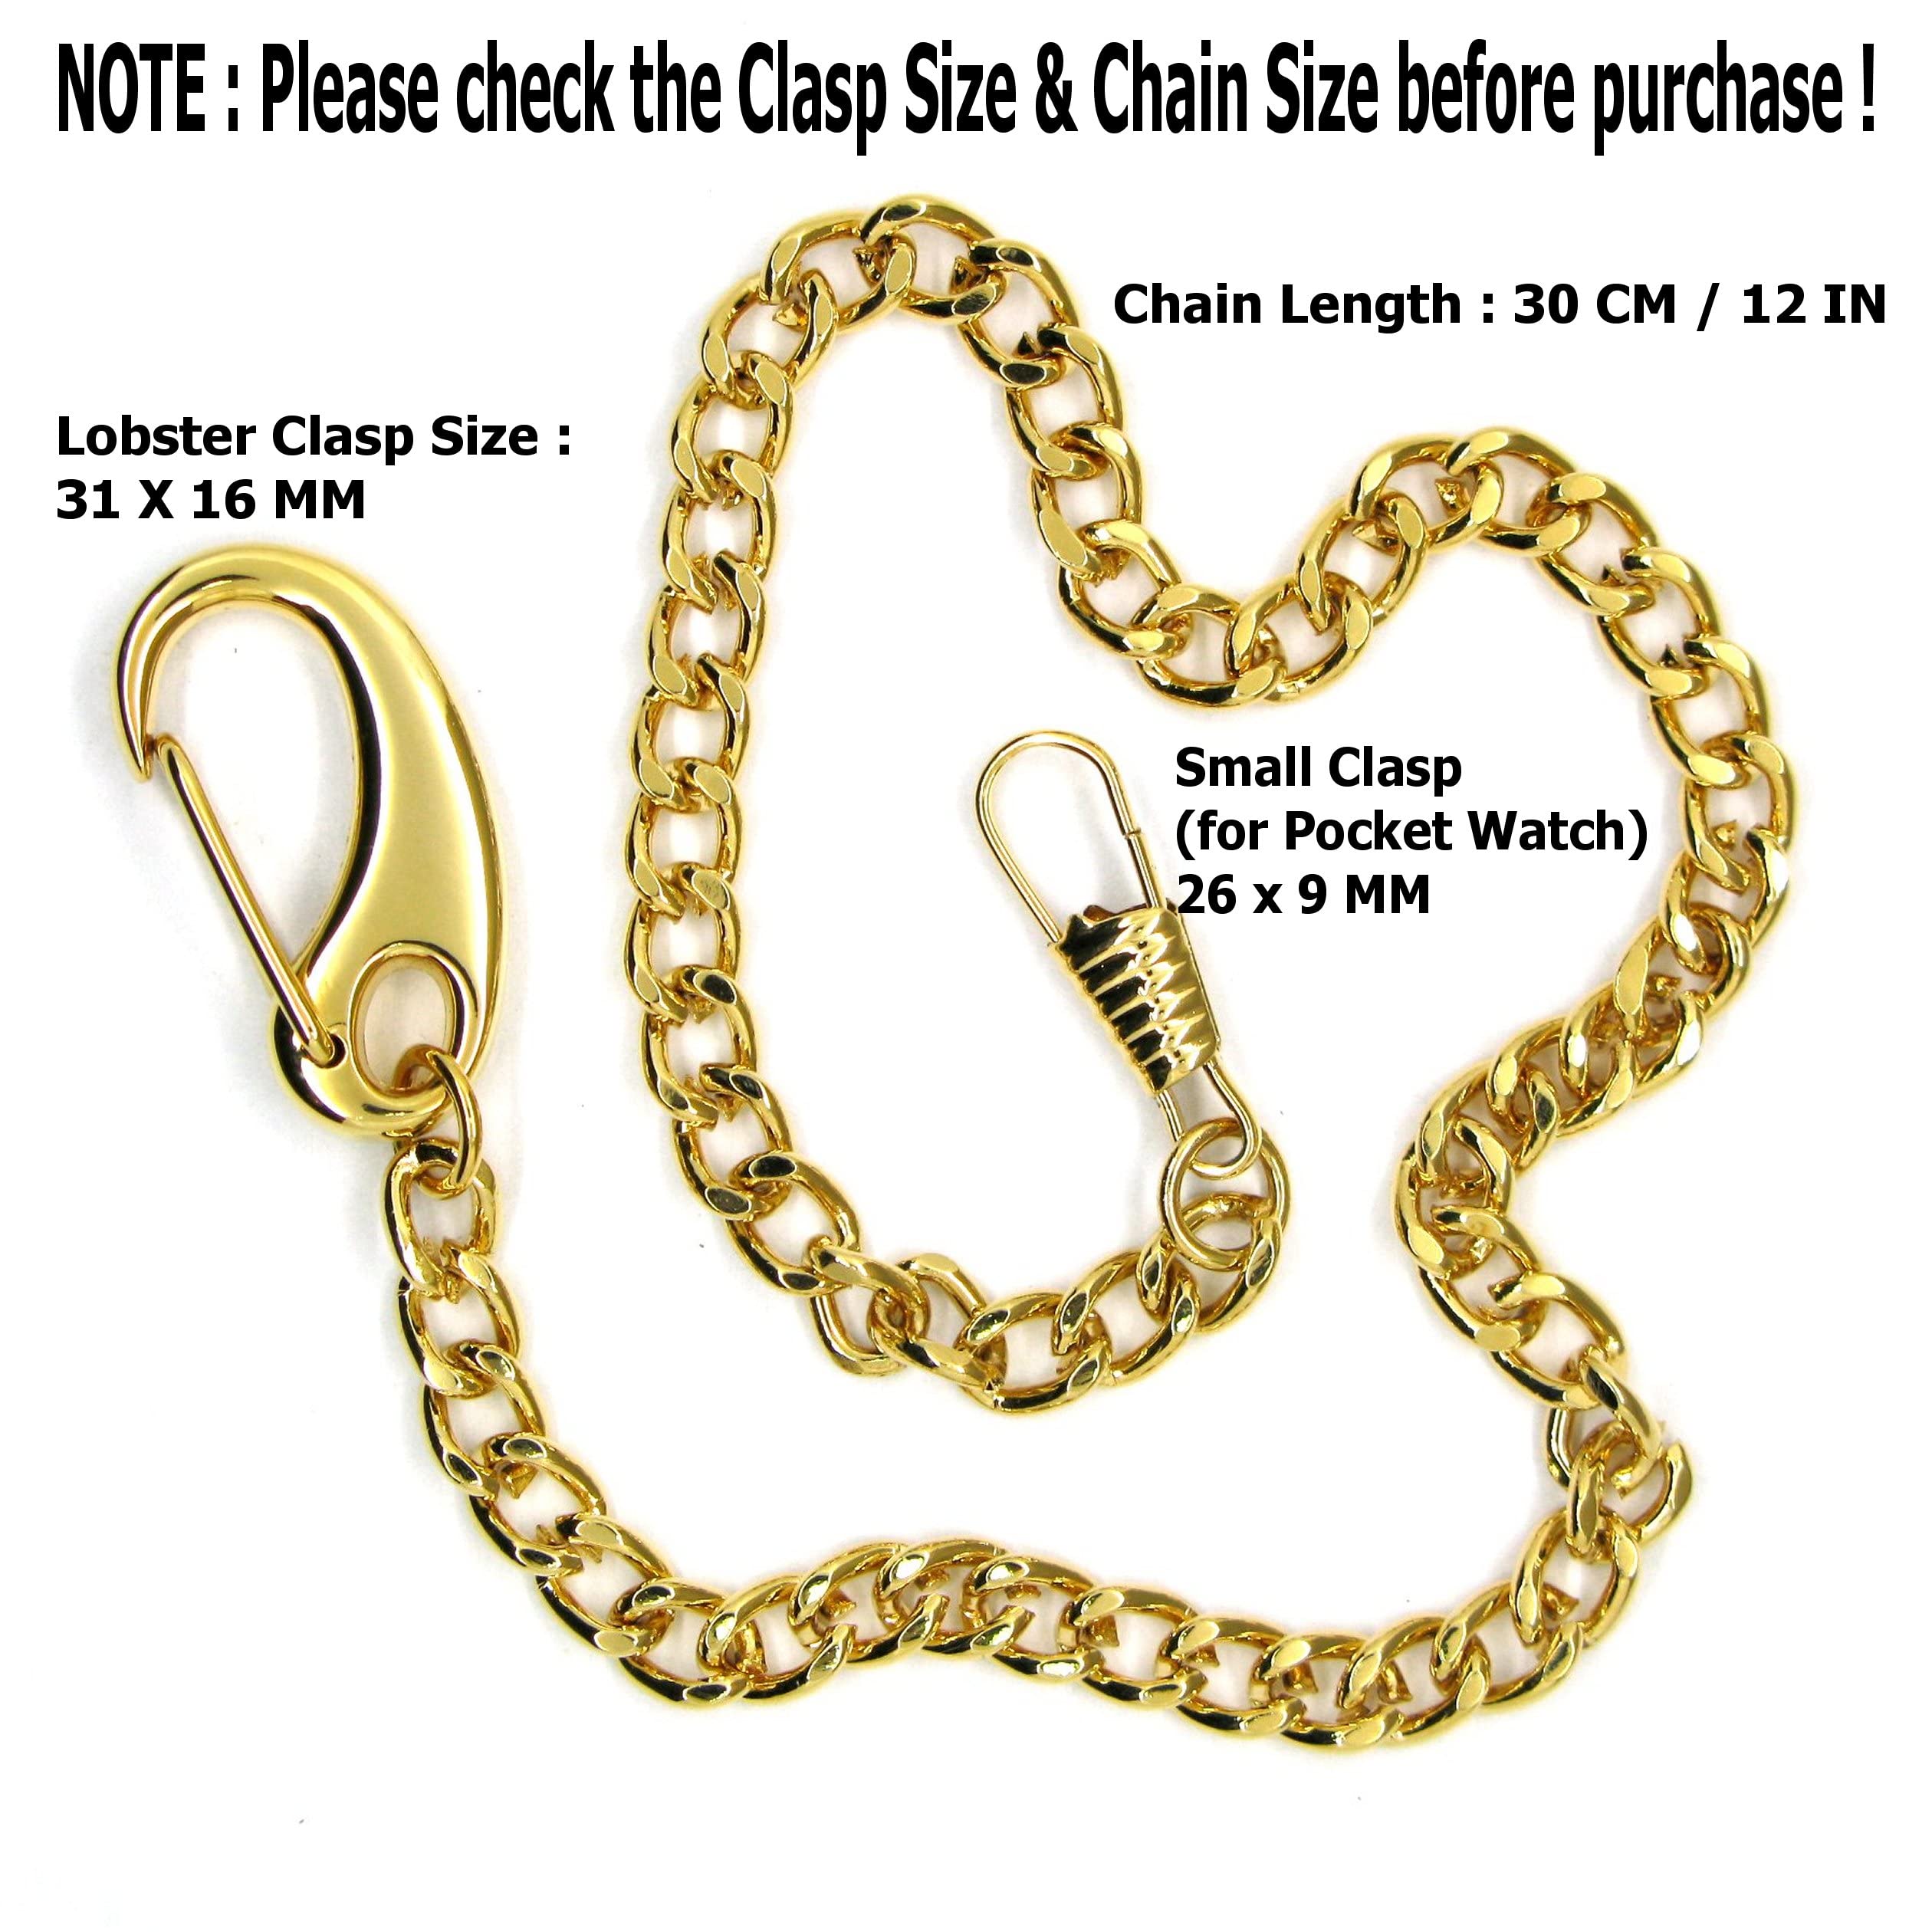 watchvshop Pocket Watch Chain Albert Chain Gold Tone Fine Polish Vest Chain with Large Lobster Claw Clasp FC12A